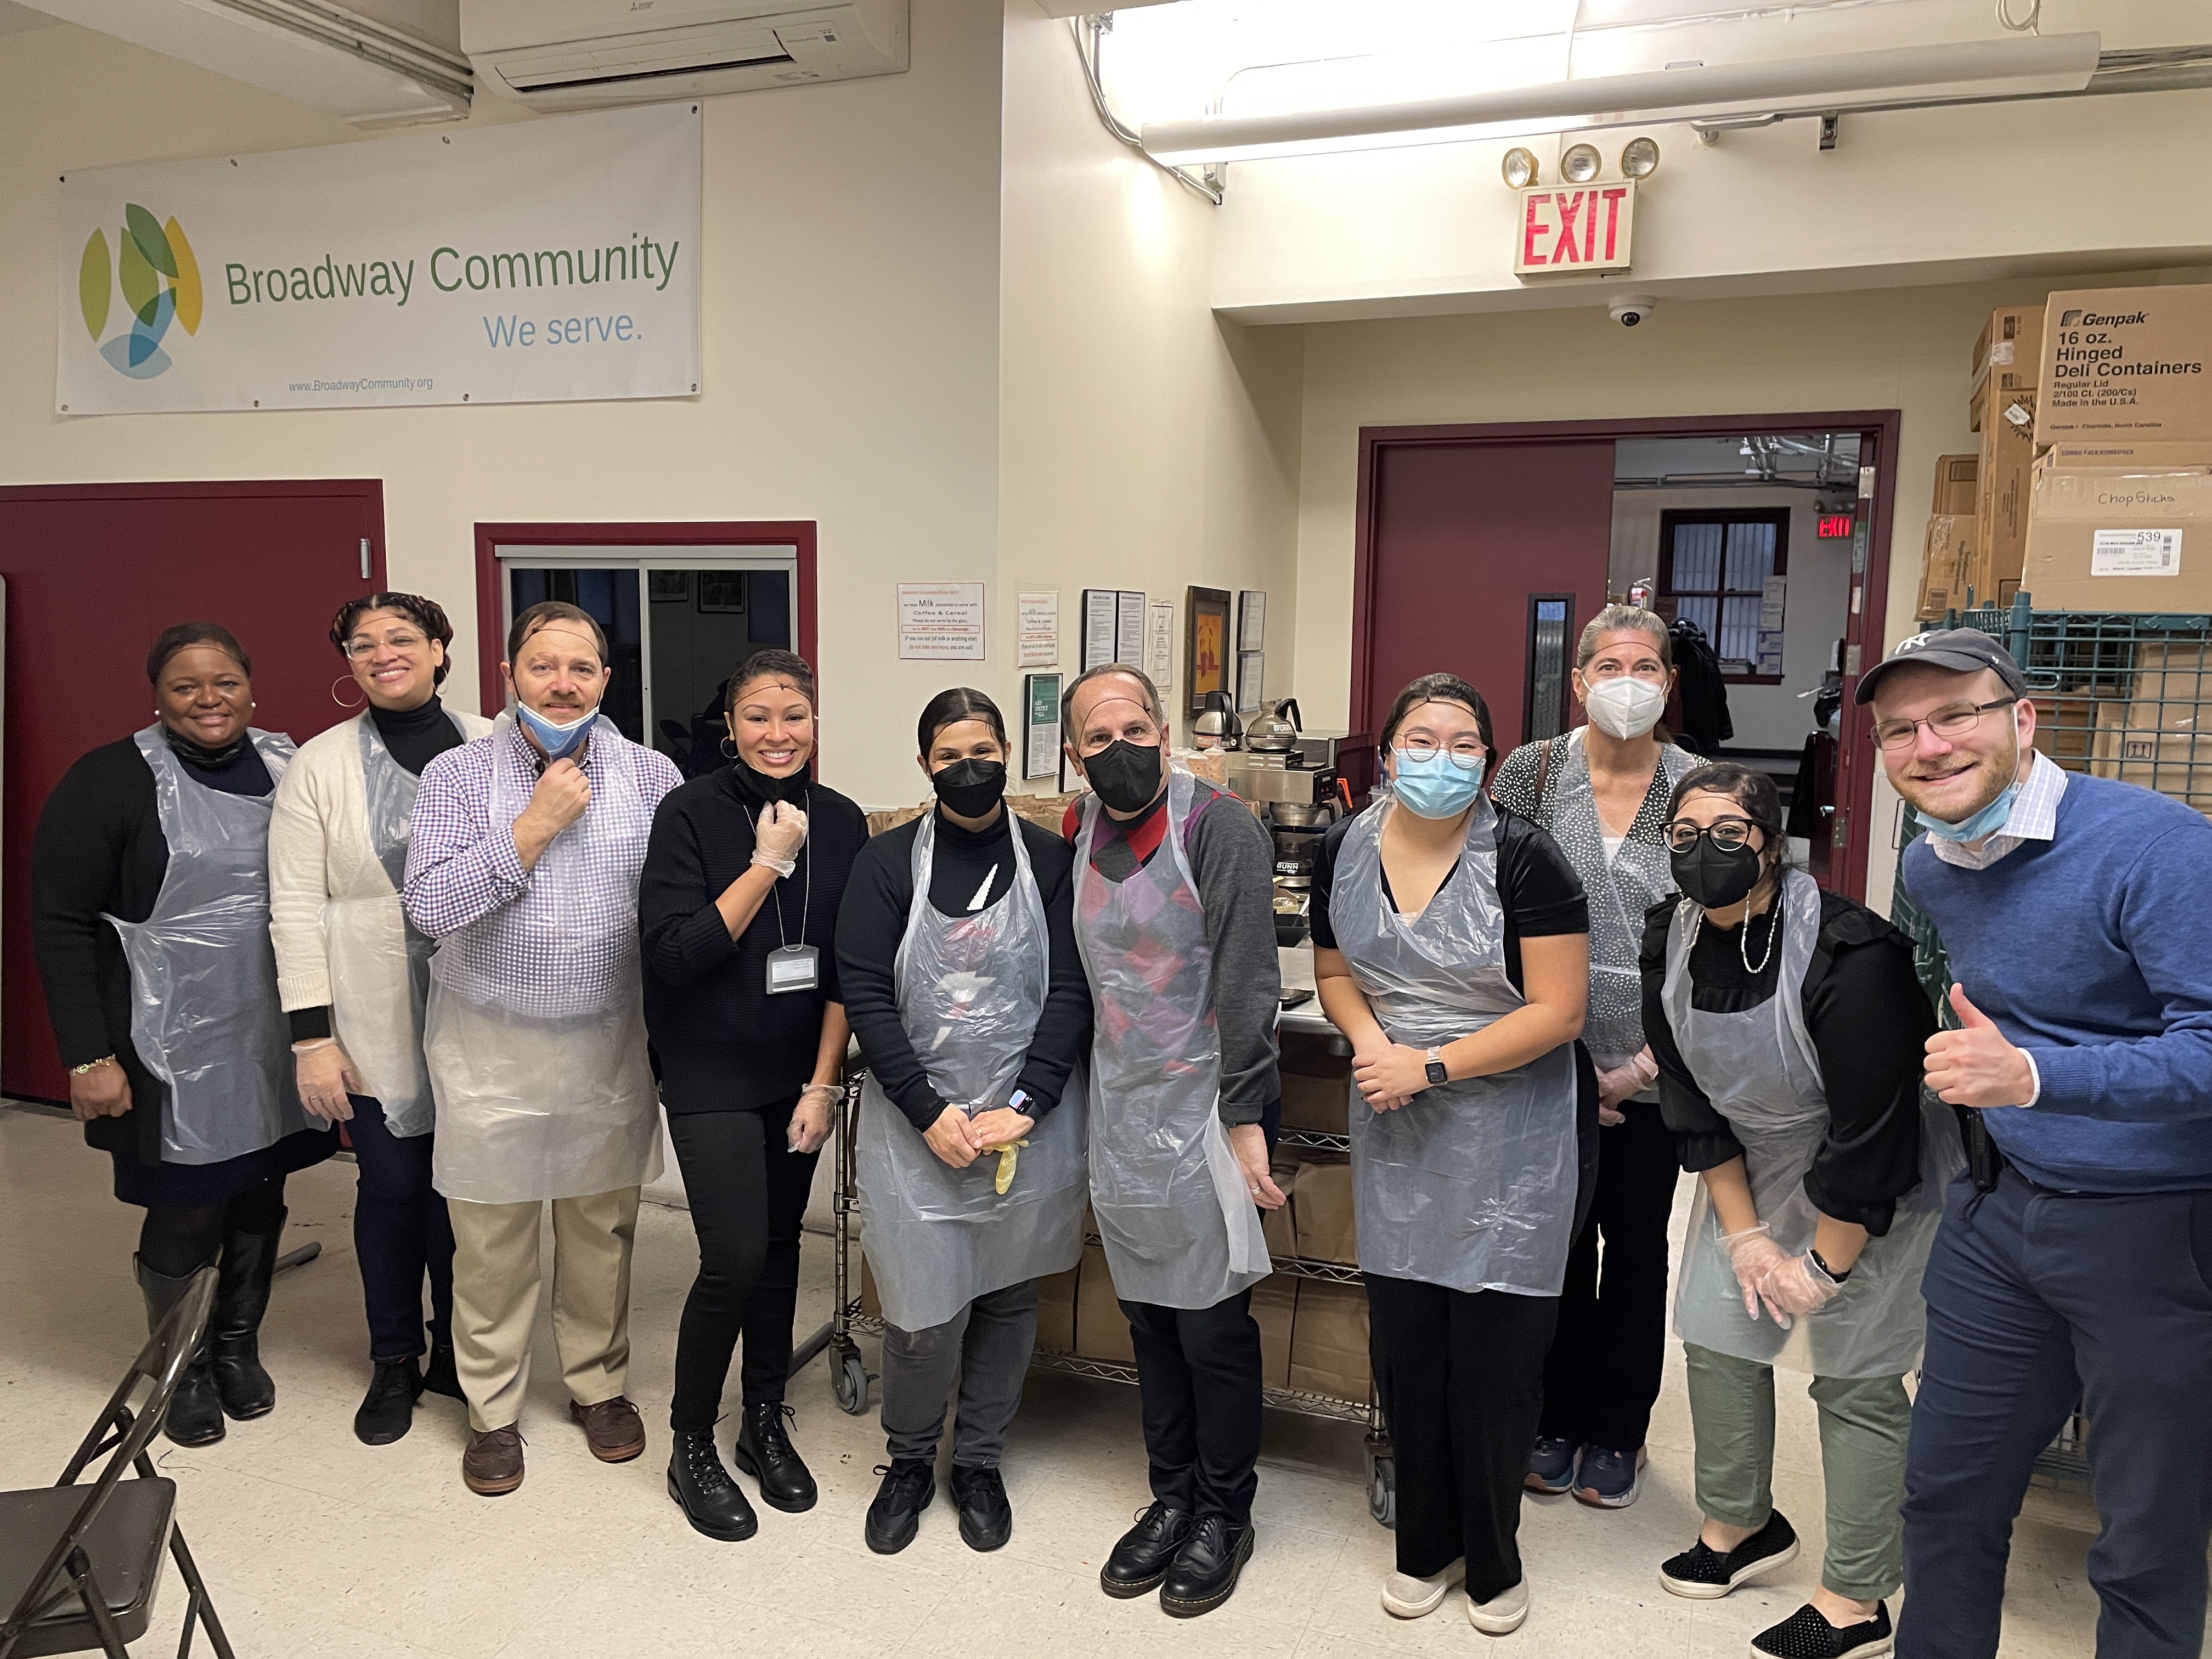 A group of folk gathered wearing hair nets, aprons, and masks. 